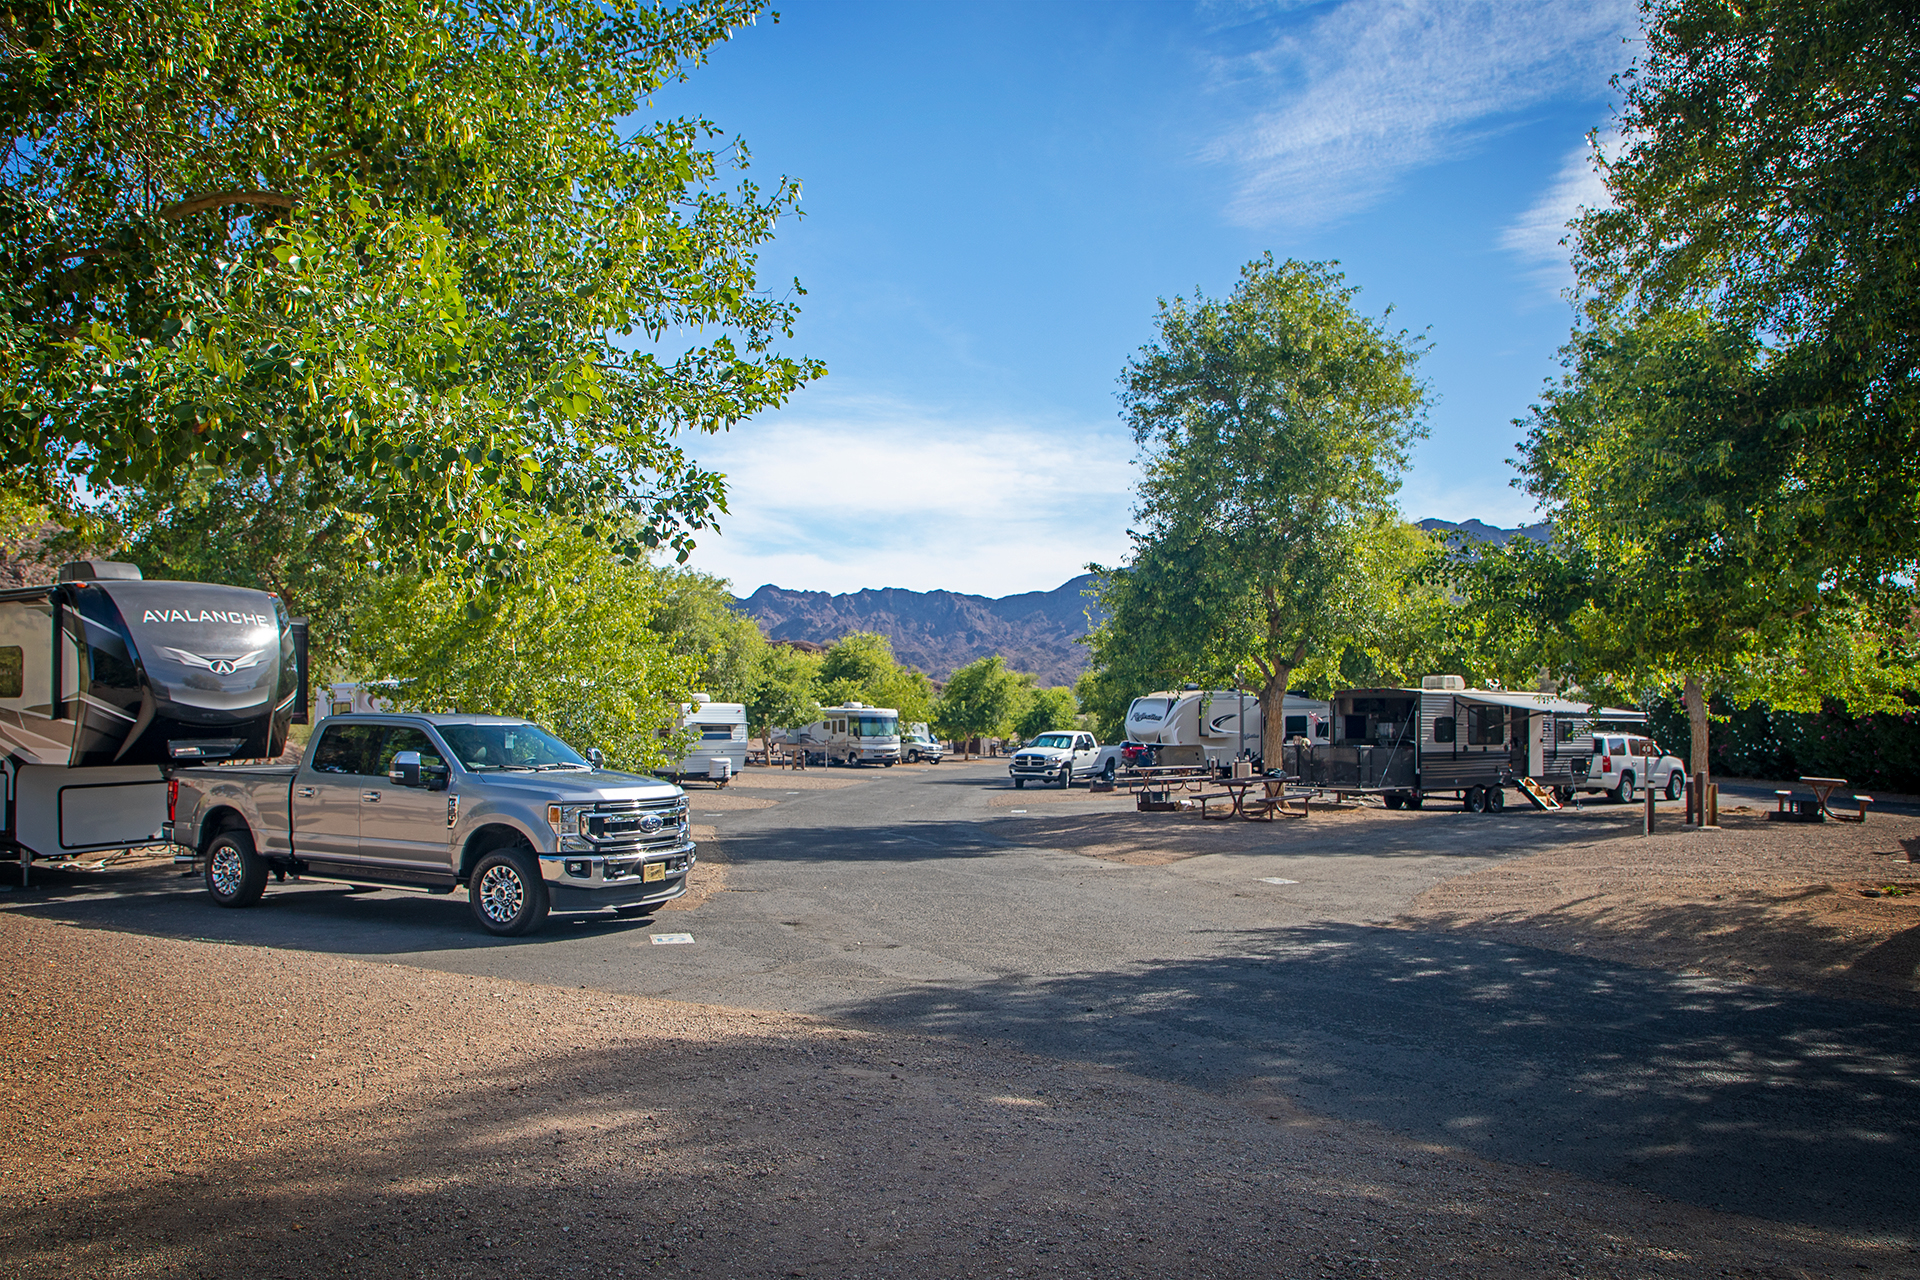 A view of RVs in the campground at Cattail Cove State Park in Lake Havasu